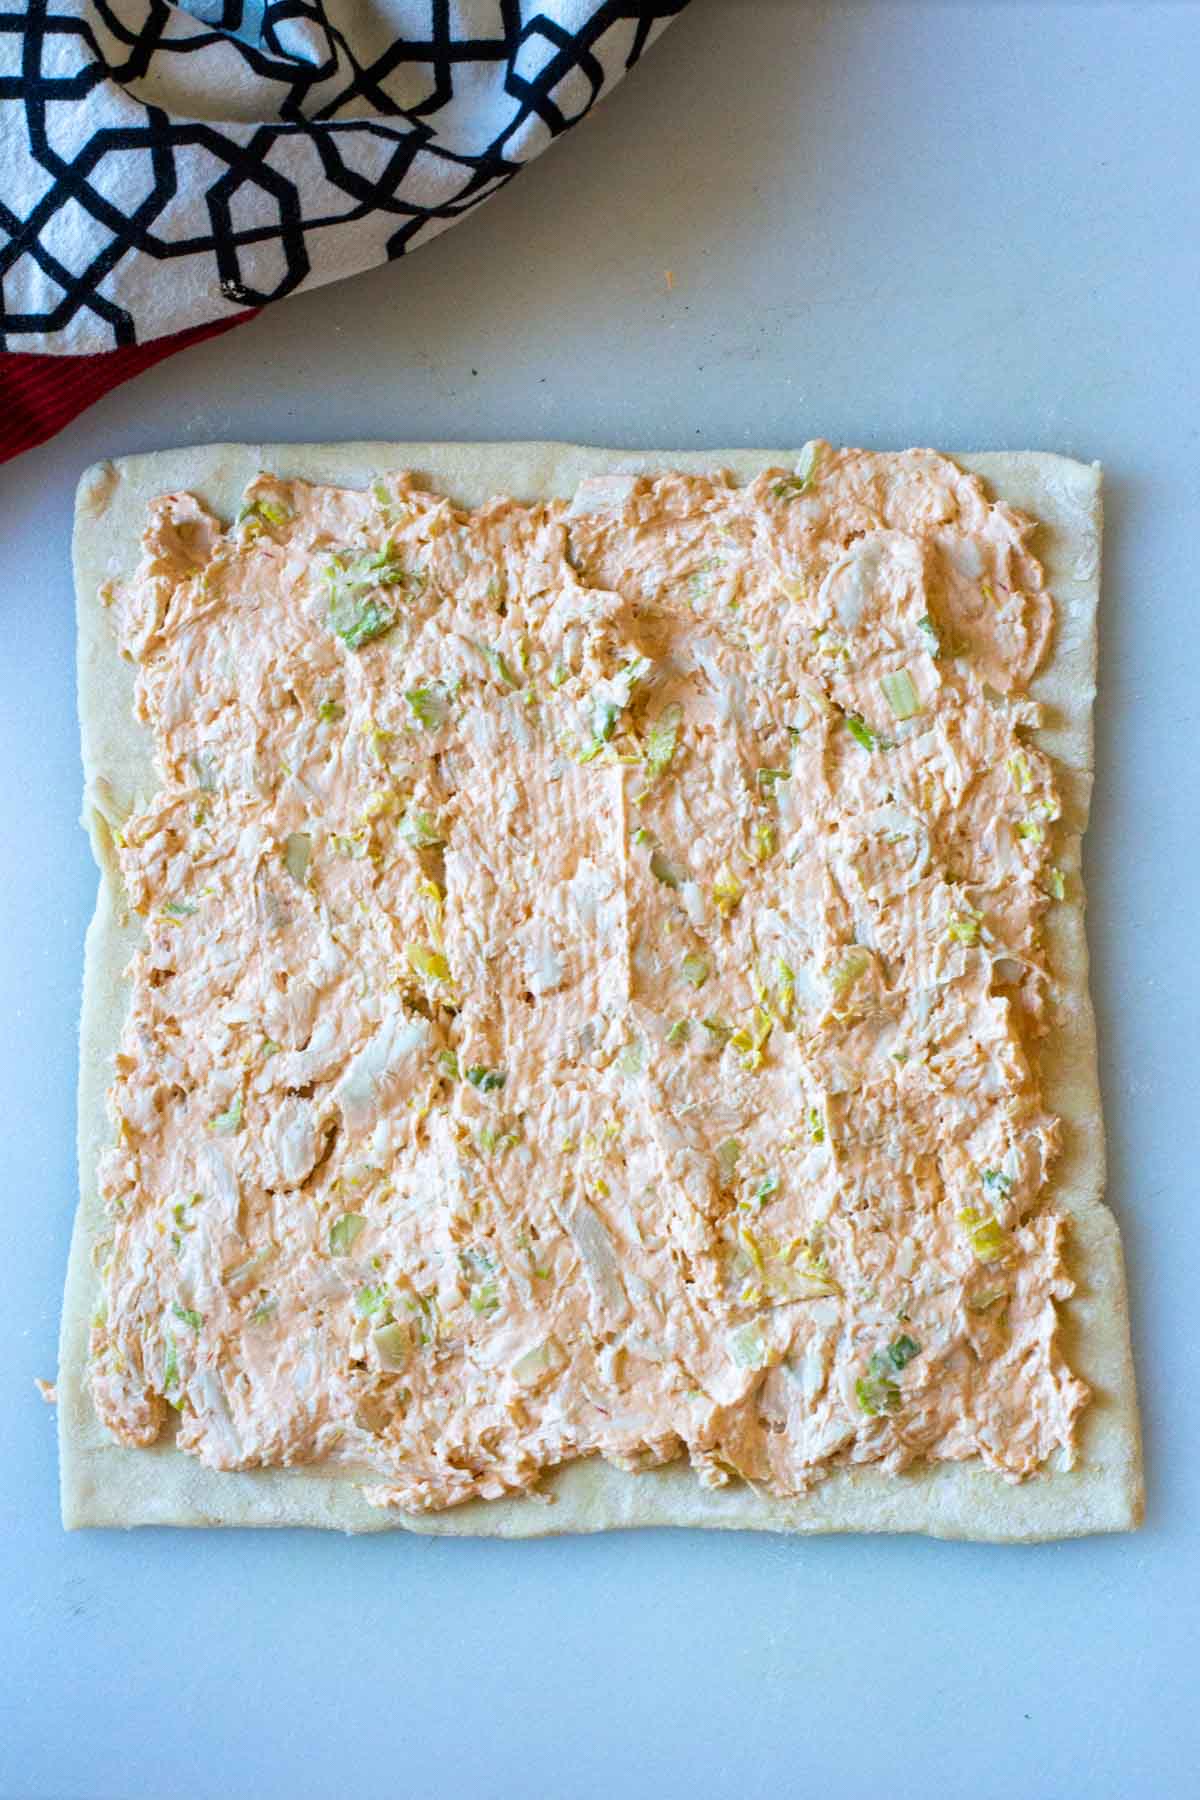 Puff pastry covered with Buffalo Chicken spread.